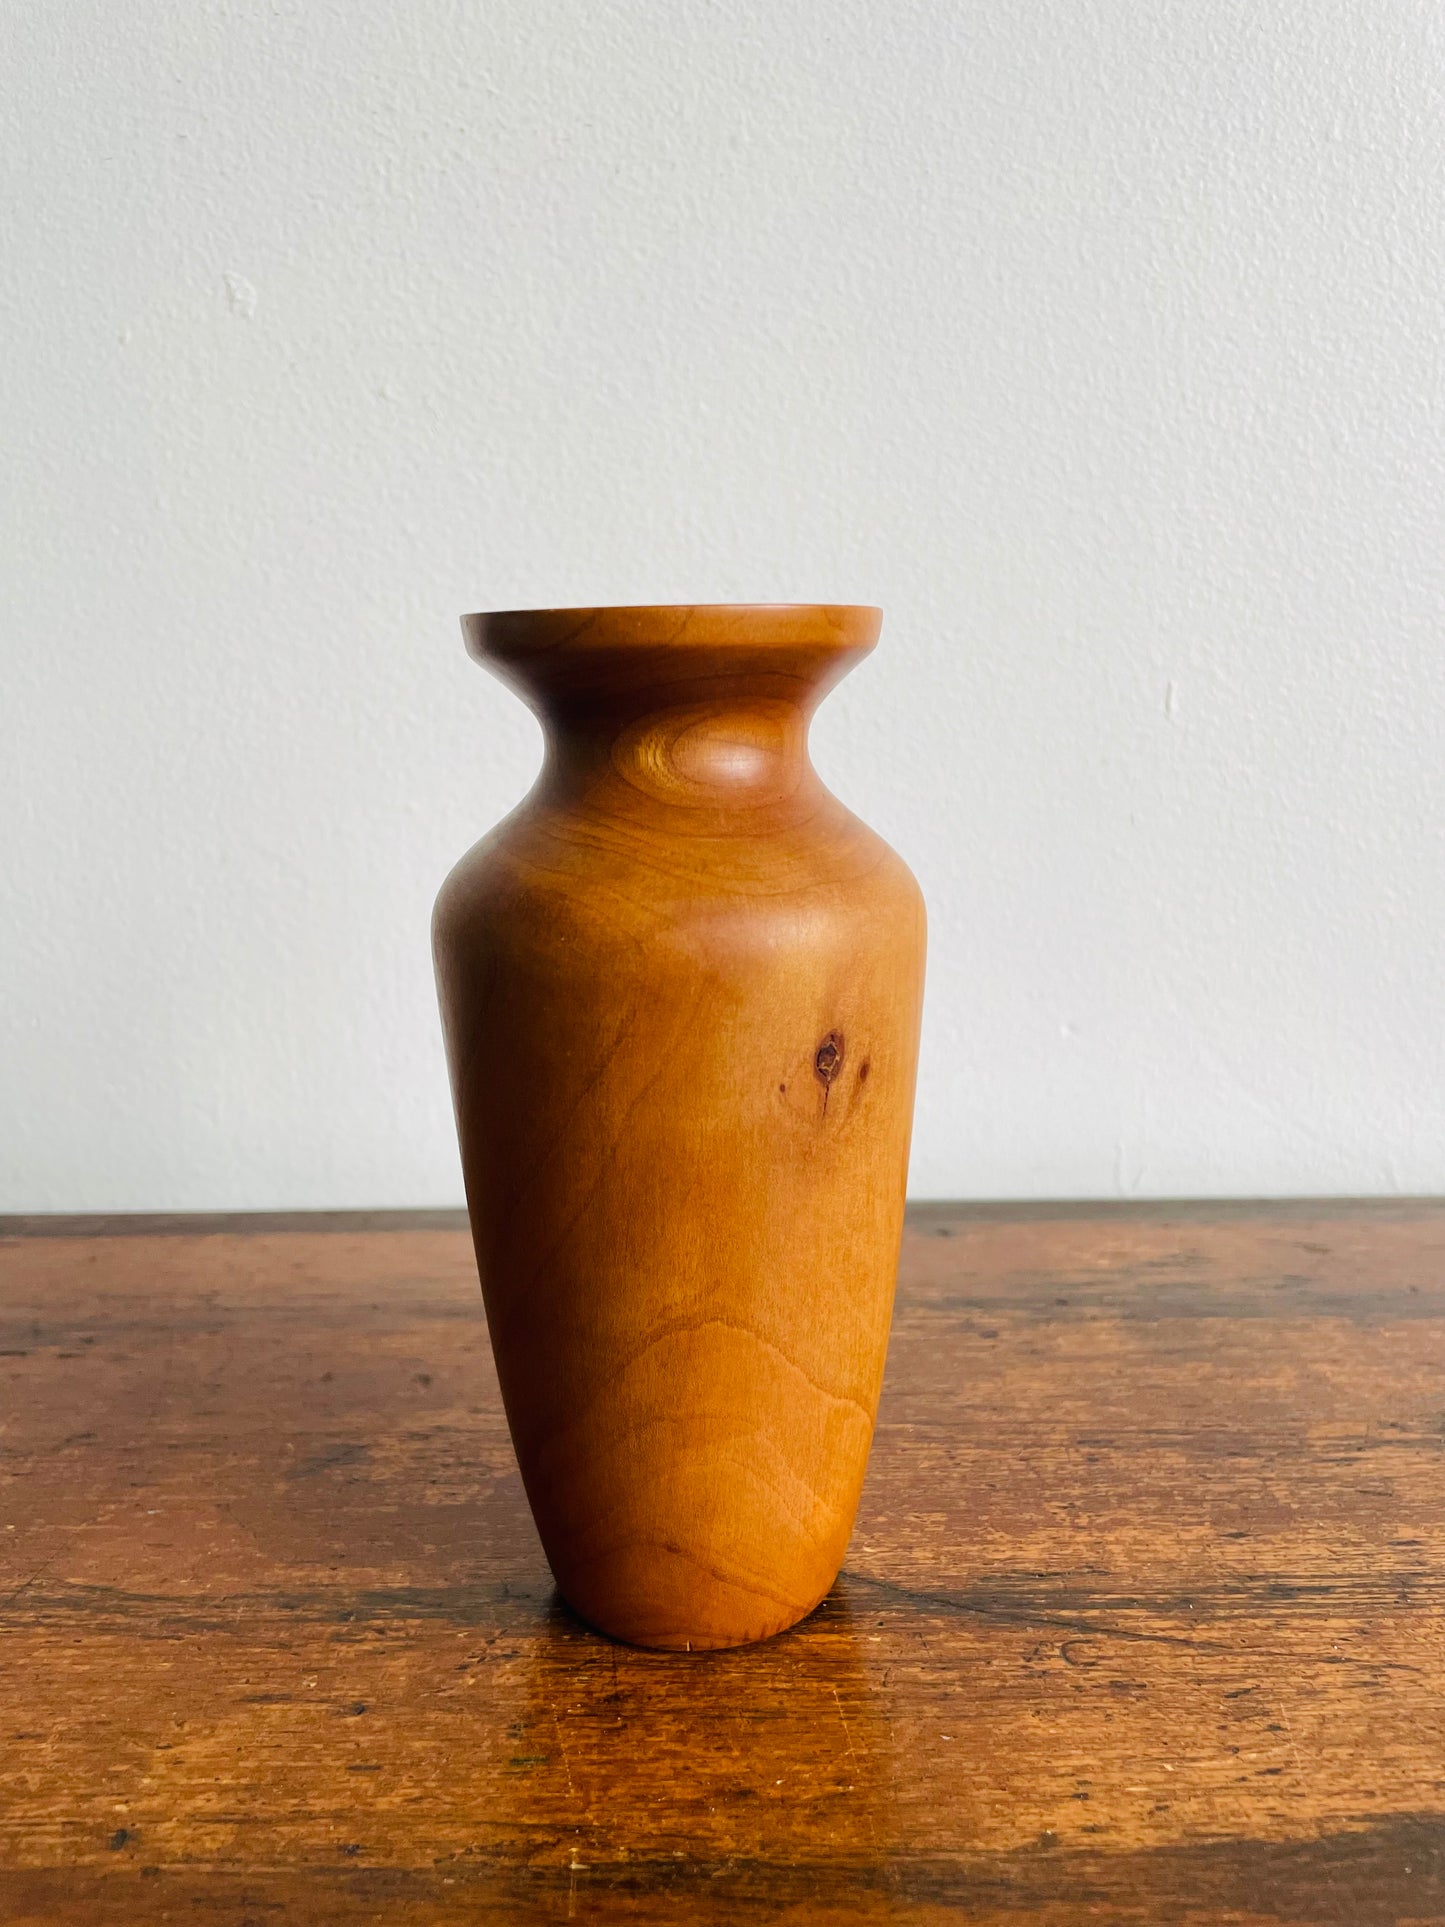 Smooth Teak Wood Bud Vase with Glass Vial Insert Inside for Watering Flowers